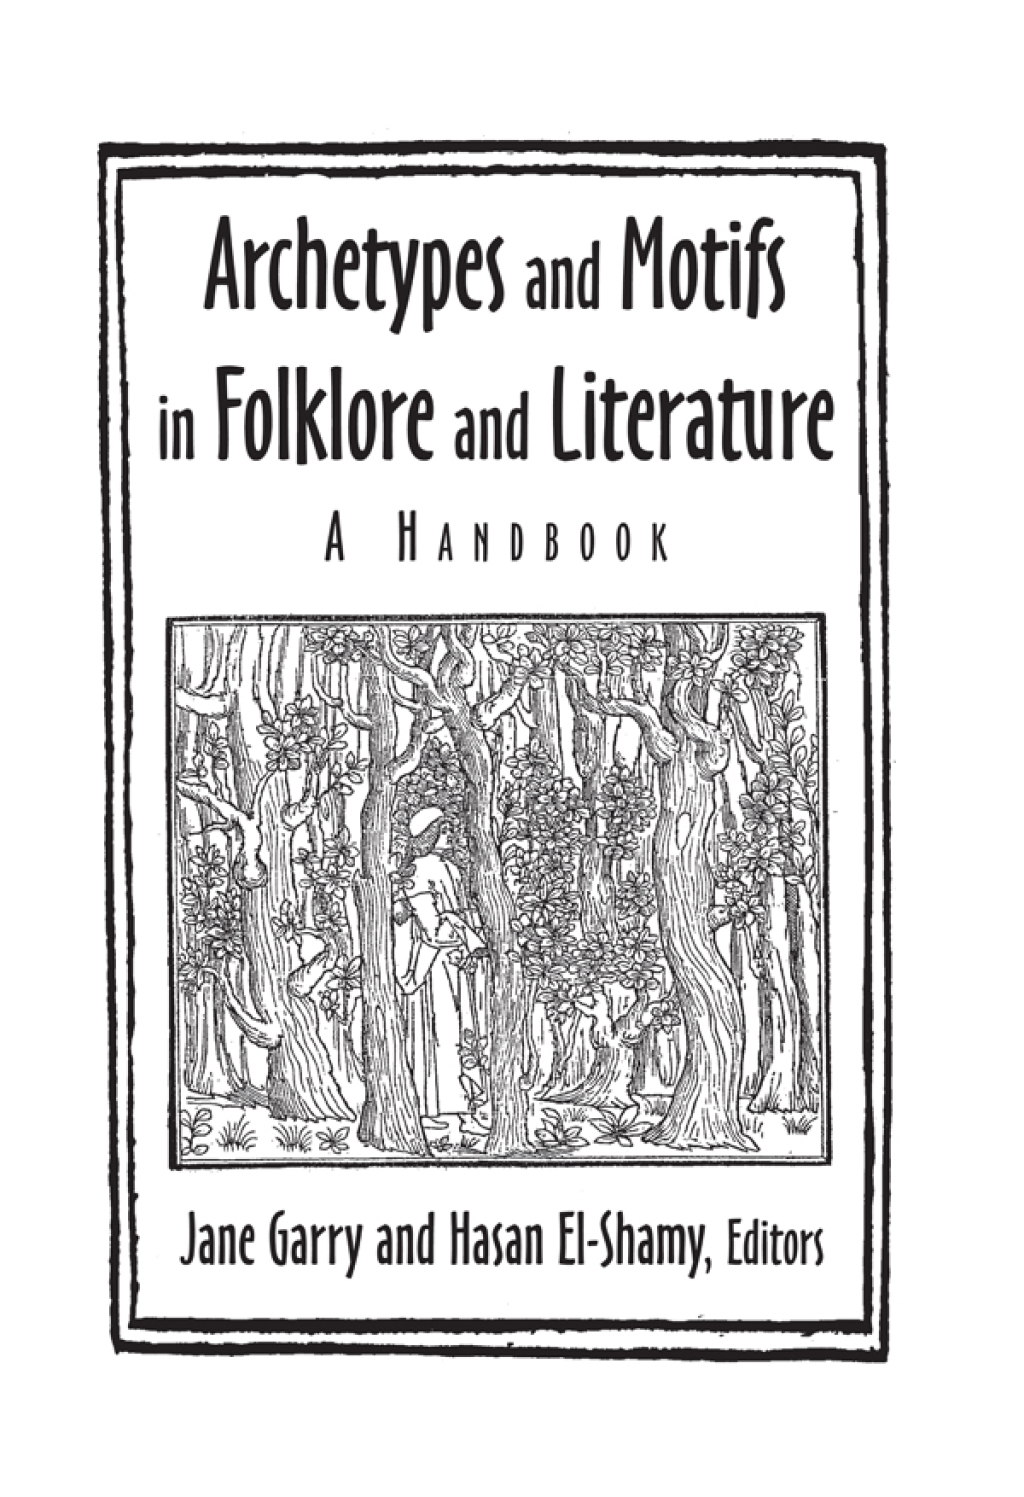 ISBN 9780765612601 product image for Archetypes and Motifs in Folklore and Literature: A Handbook - 1st Edition (eBoo | upcitemdb.com